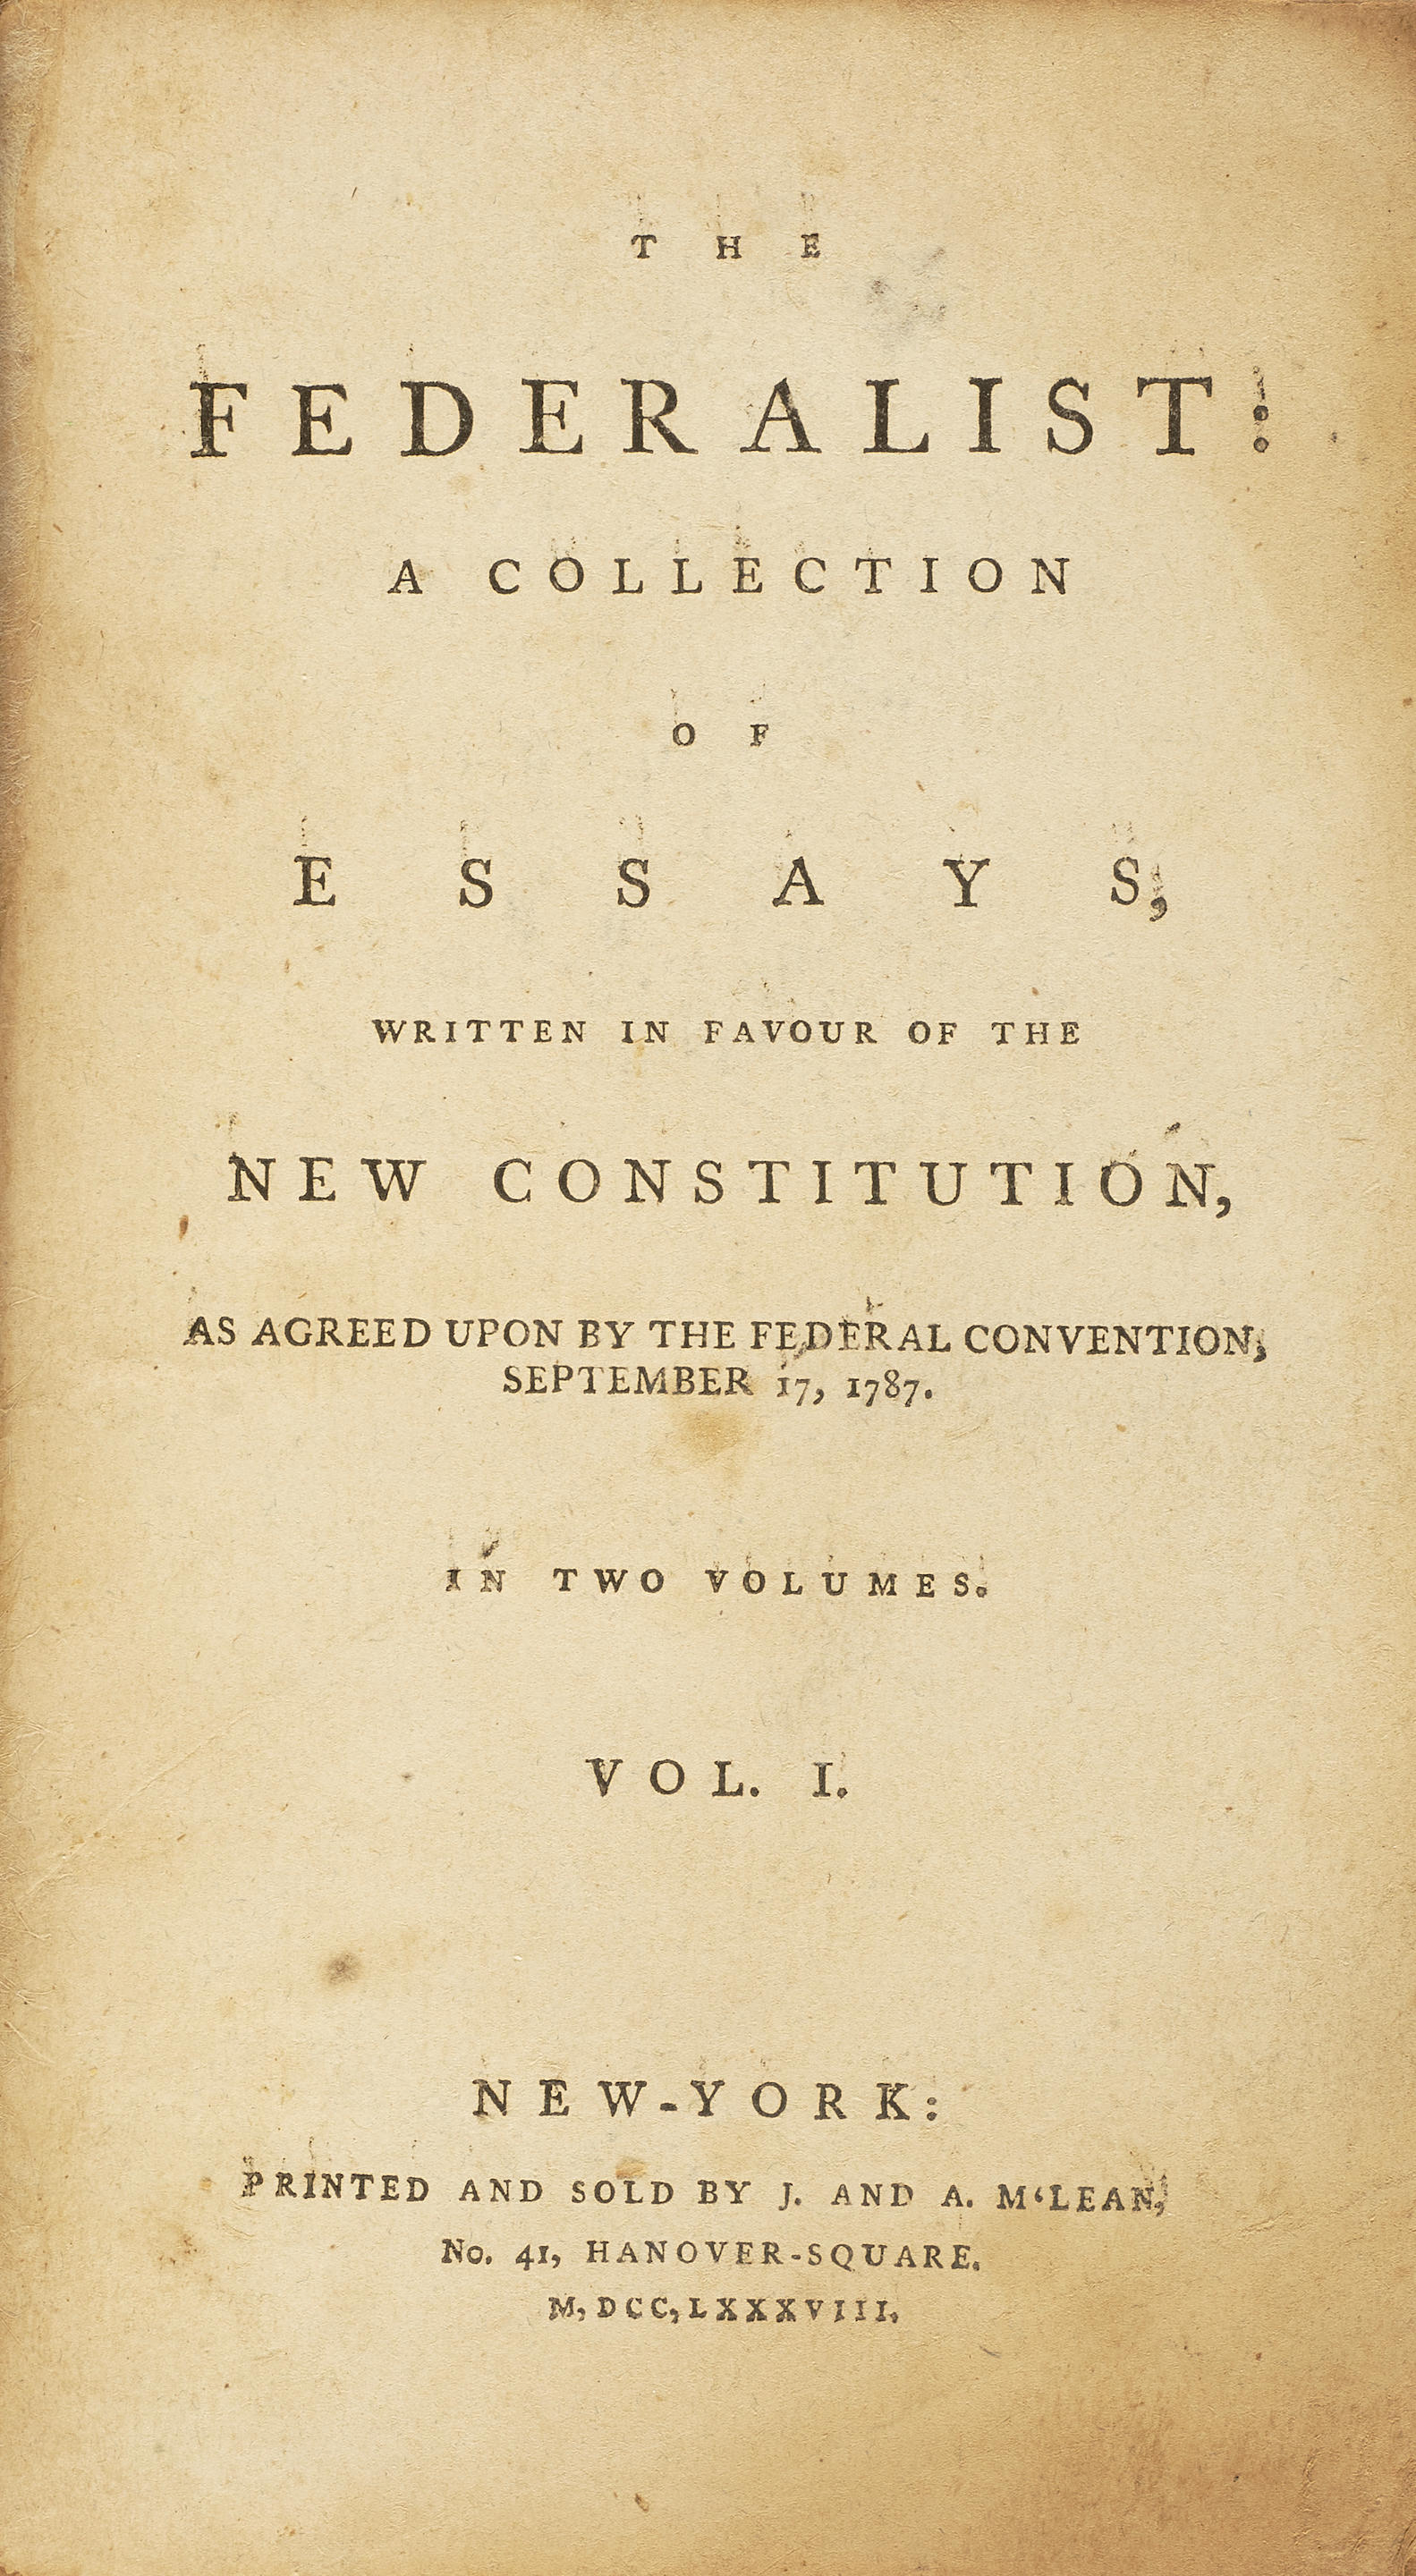 AN UNCUT COPY OF THE FEDERALIST PAPERS.